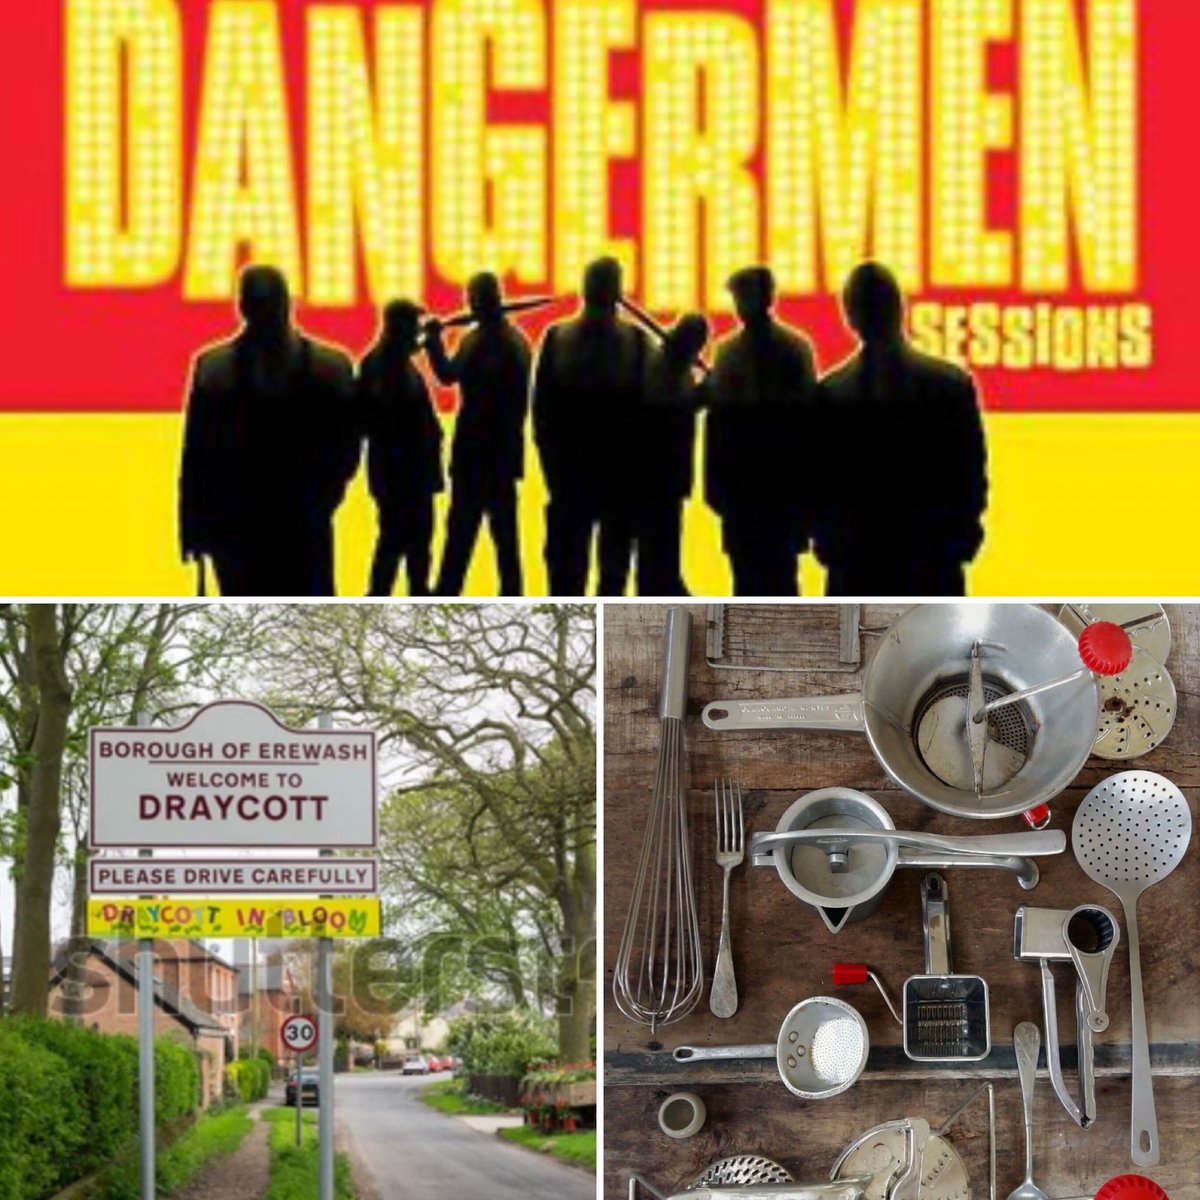 For our #February meeting next week John Skinner of the #Draycott men’s group the #Dangermen will be teaching us about old curiosities. We should all learn something new. Come along, why don’t you? Visitors £5 💚🤍@NottsFedWI